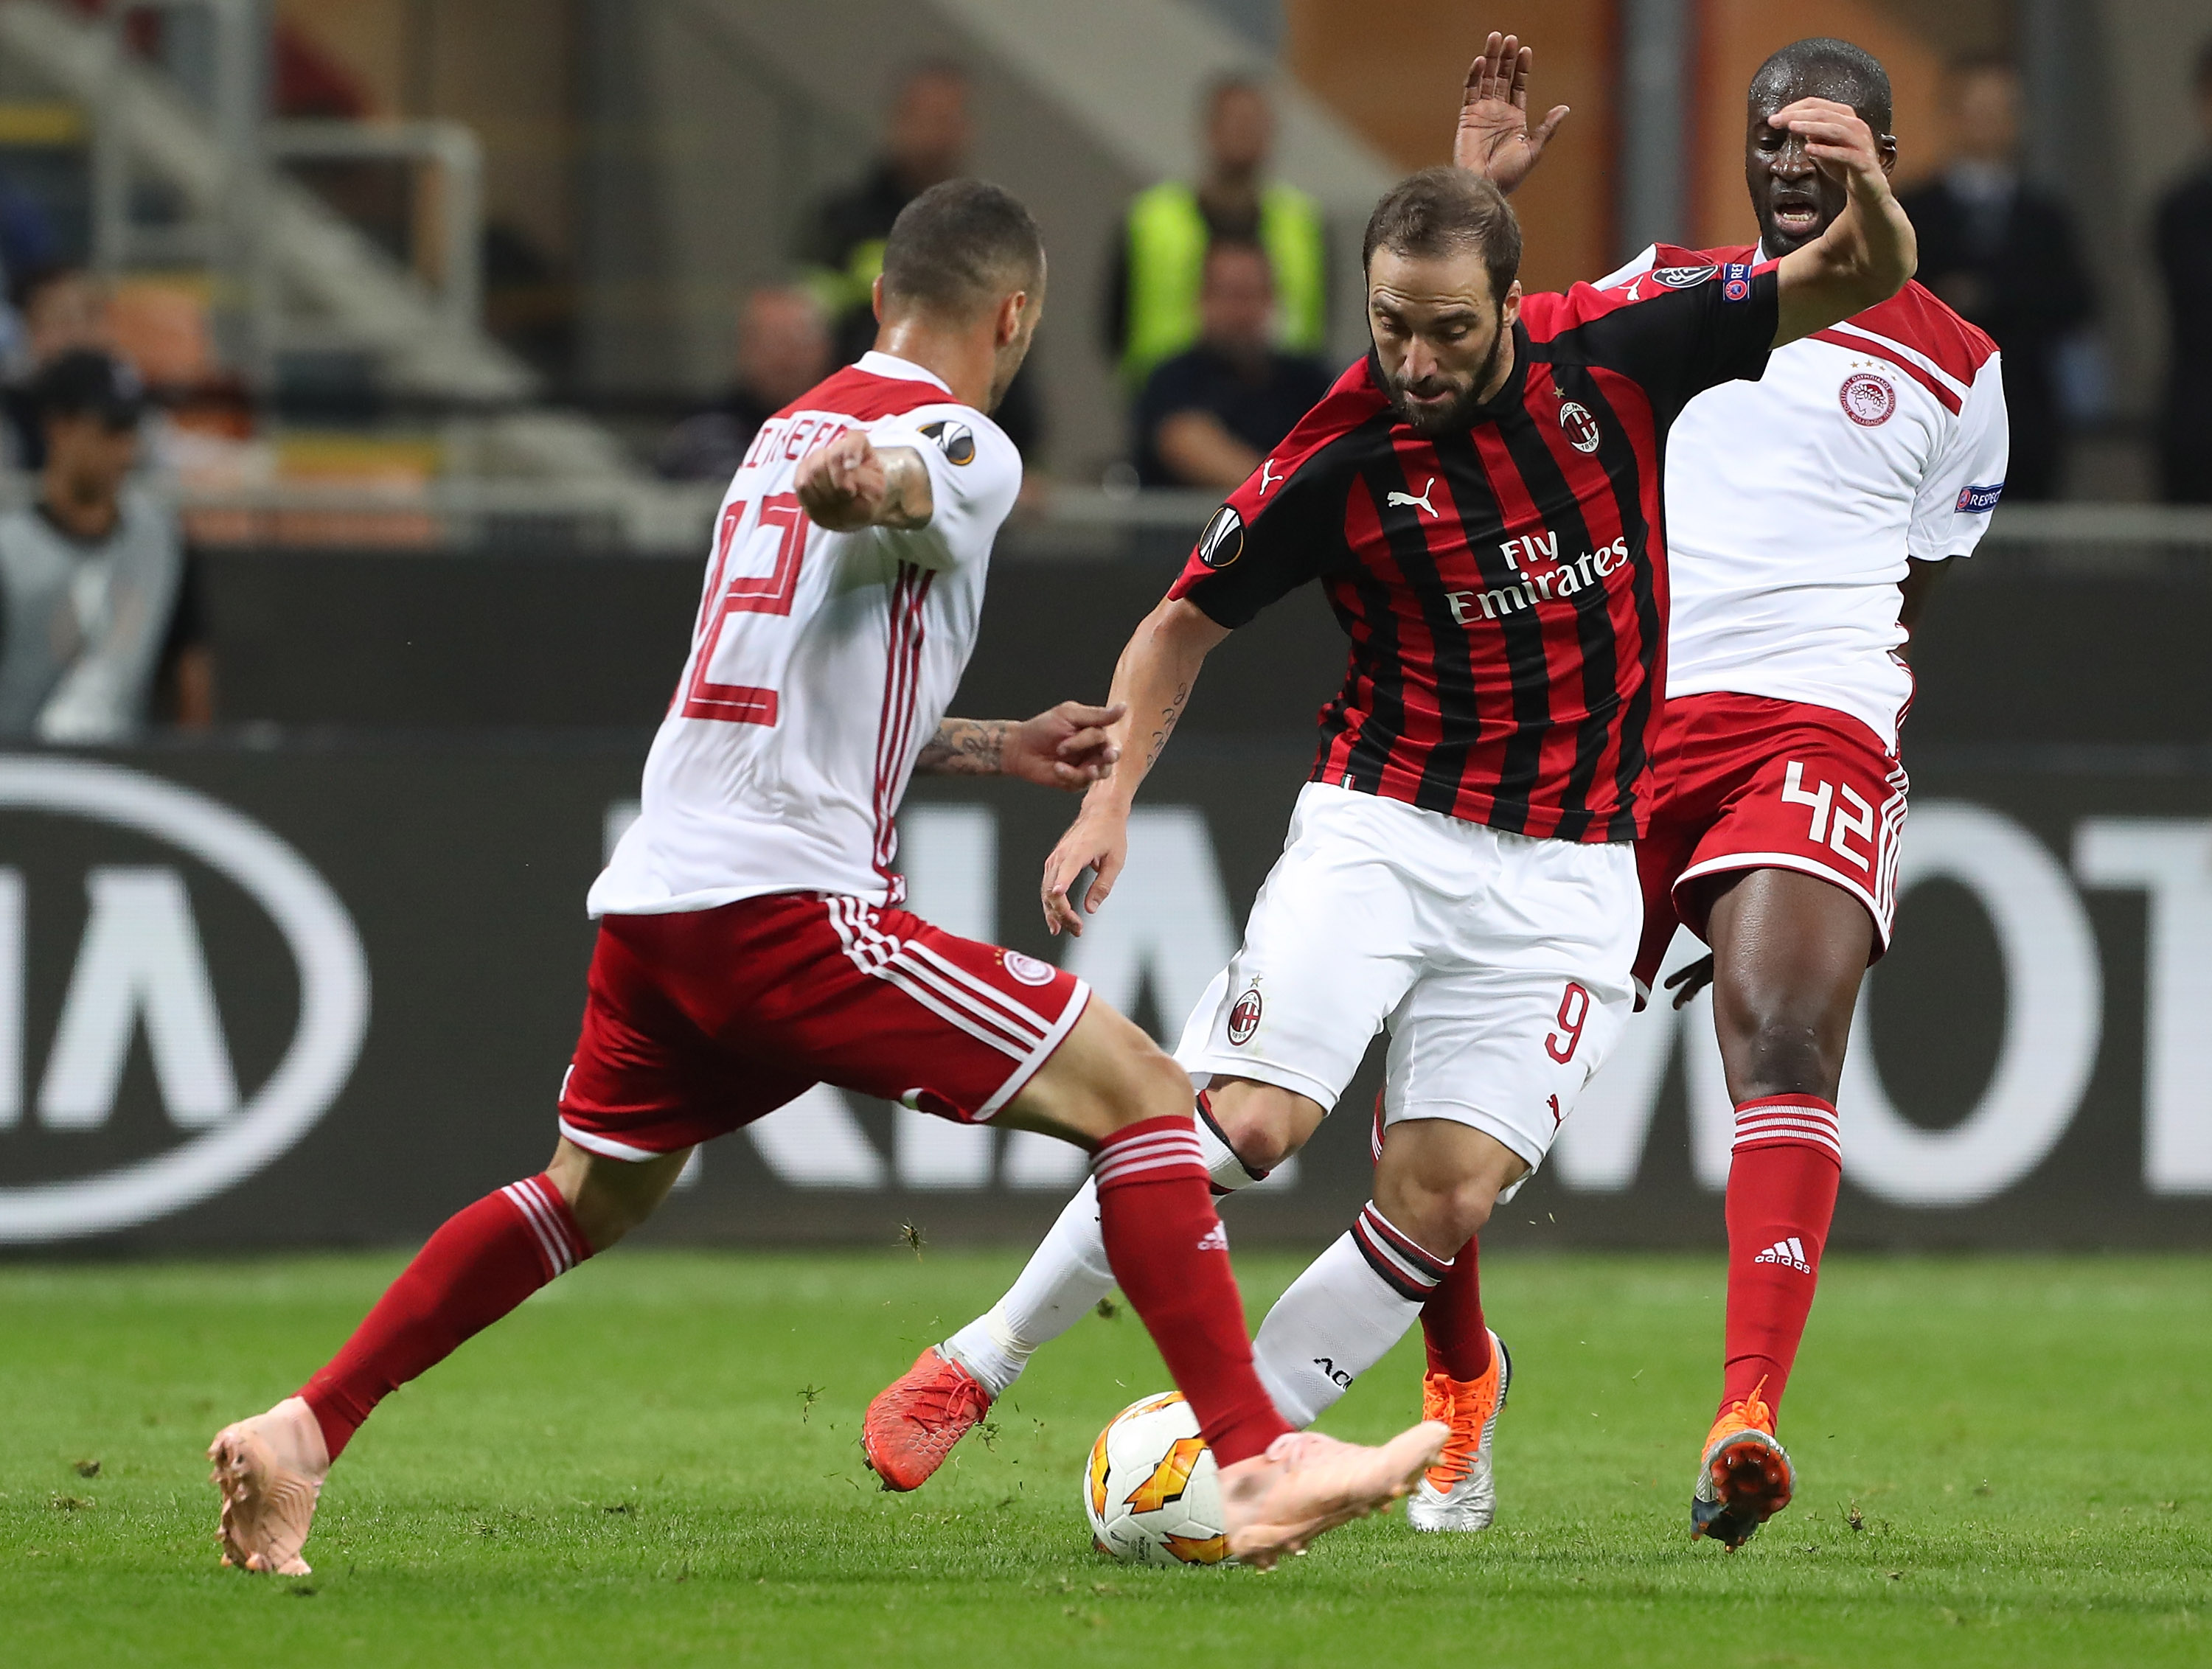 MILAN, ITALY - OCTOBER 04: Gonzalo Higuain (C) of AC Milan is challenged by Yaya Toure (R) and Guilherme (L) of Olympiacos during the UEFA Europa League Group F match between AC Milan and Olympiacos at Stadio Giuseppe Meazza on October 4, 2018 in Milan, Italy. (Photo by Marco Luzzani/Getty Images)